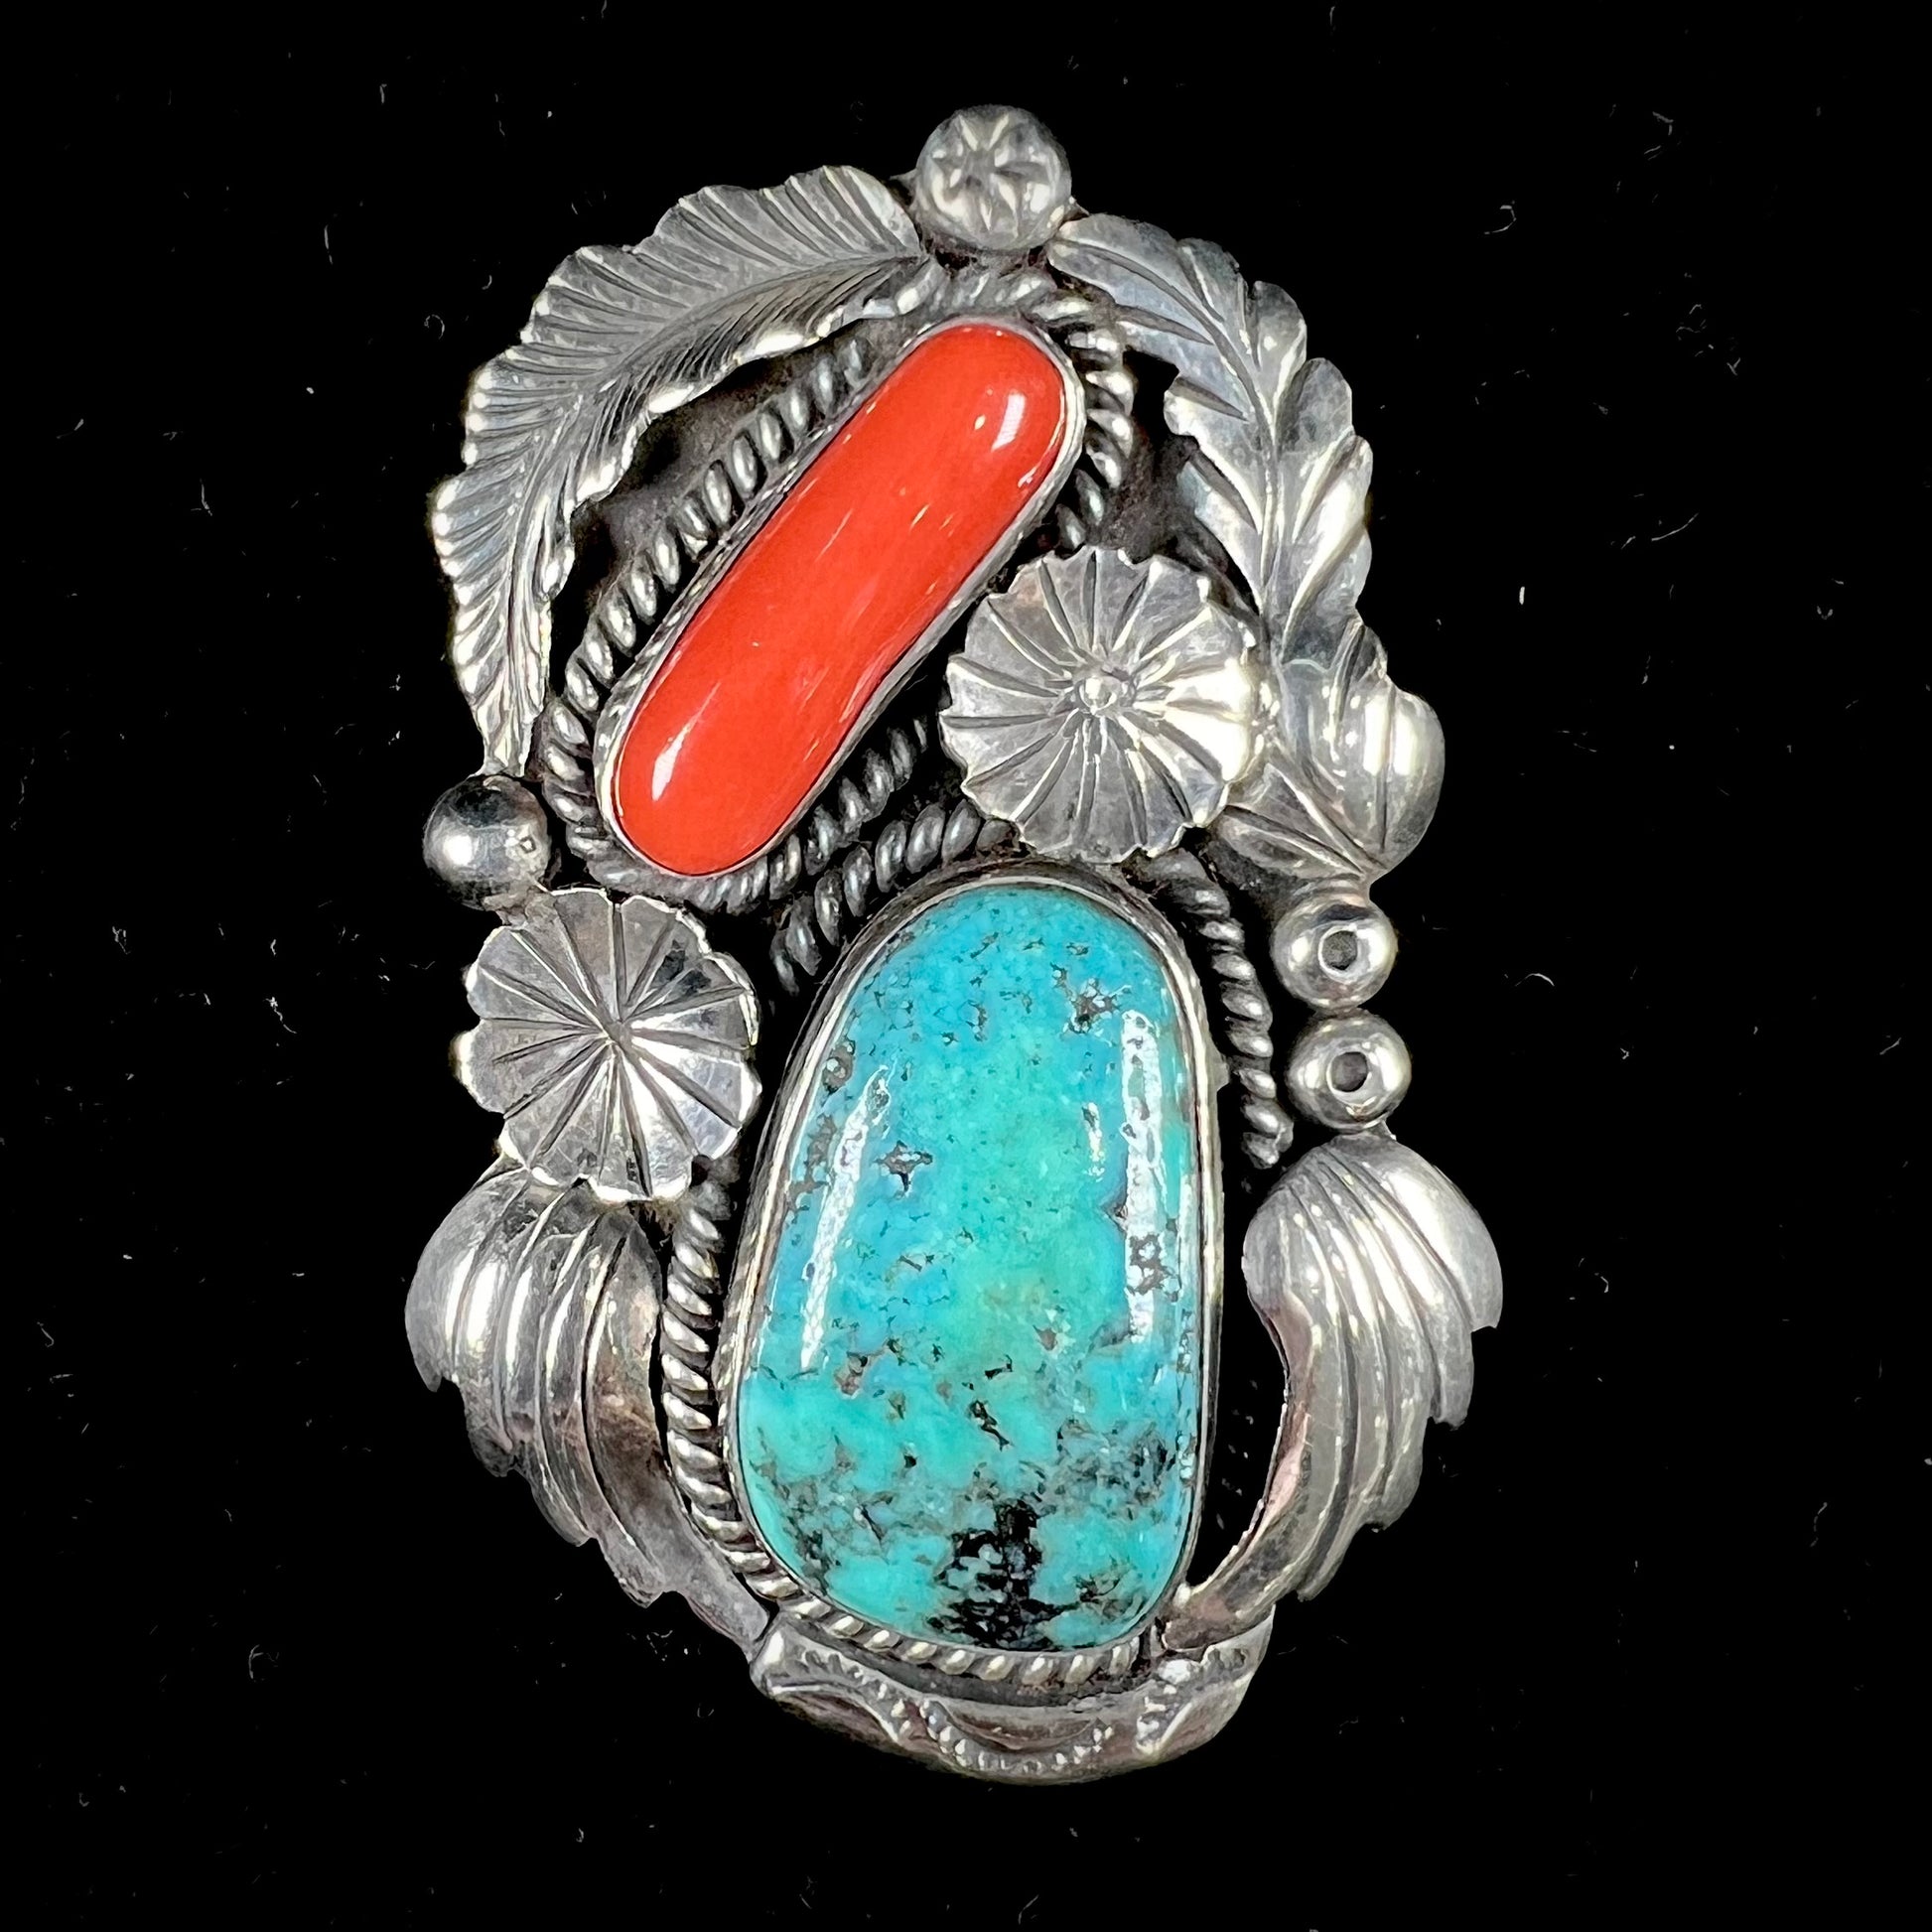 A sterling silver, 1970's Navajo pendant set with Kingman turquoise and coral stones, handmade by artist Angela Lee.